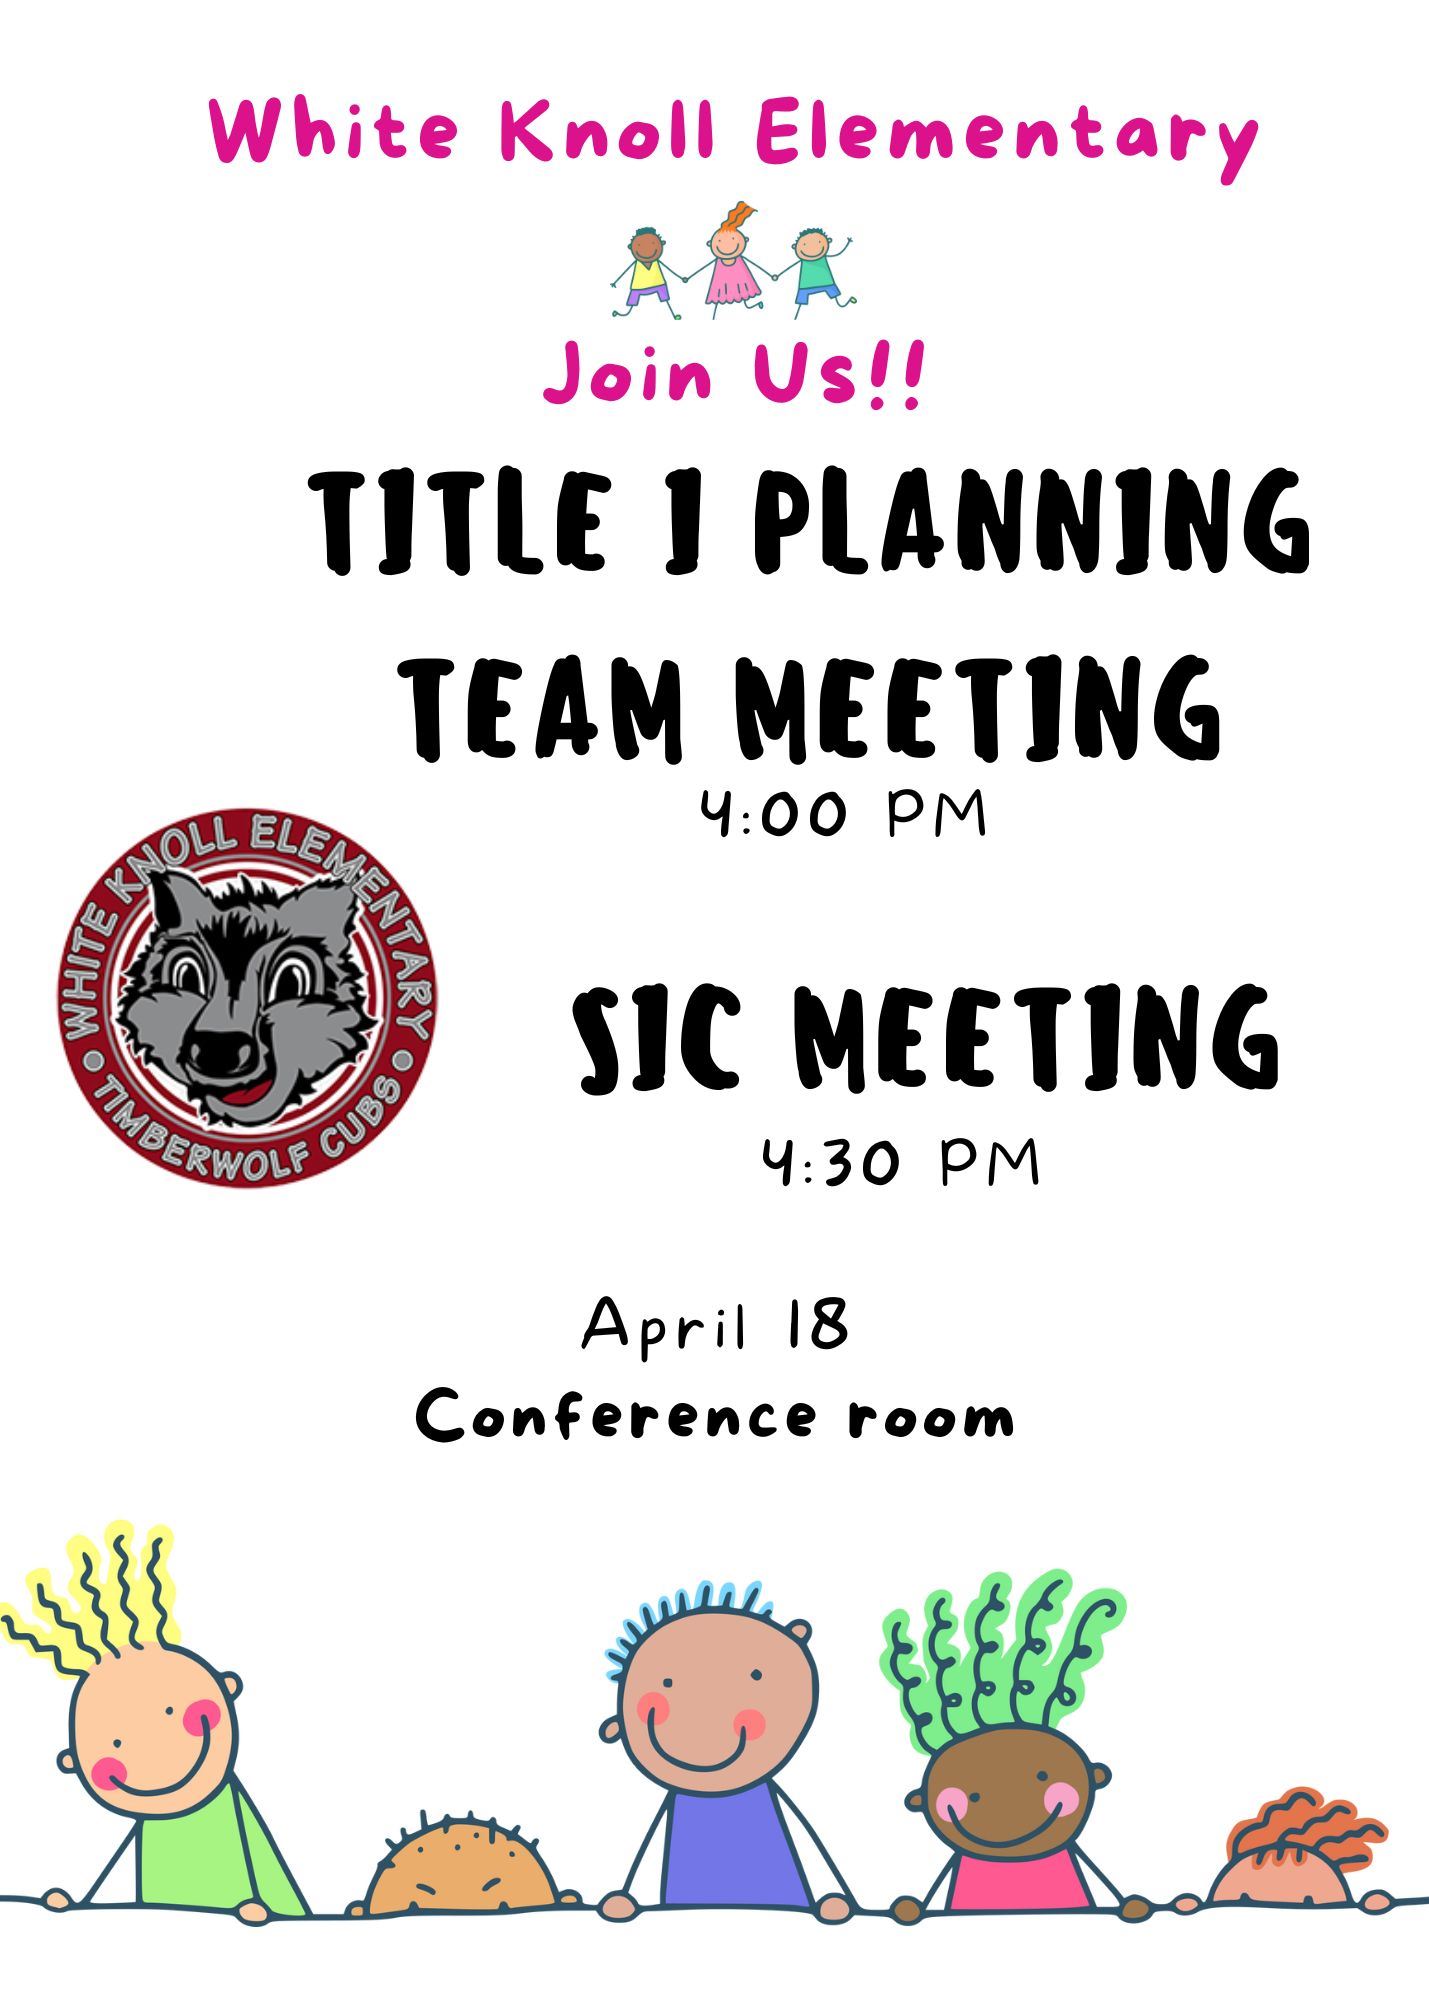 Join us for the White Knoll Title 1 Planning Meeting on April 18th at 4:00 pm